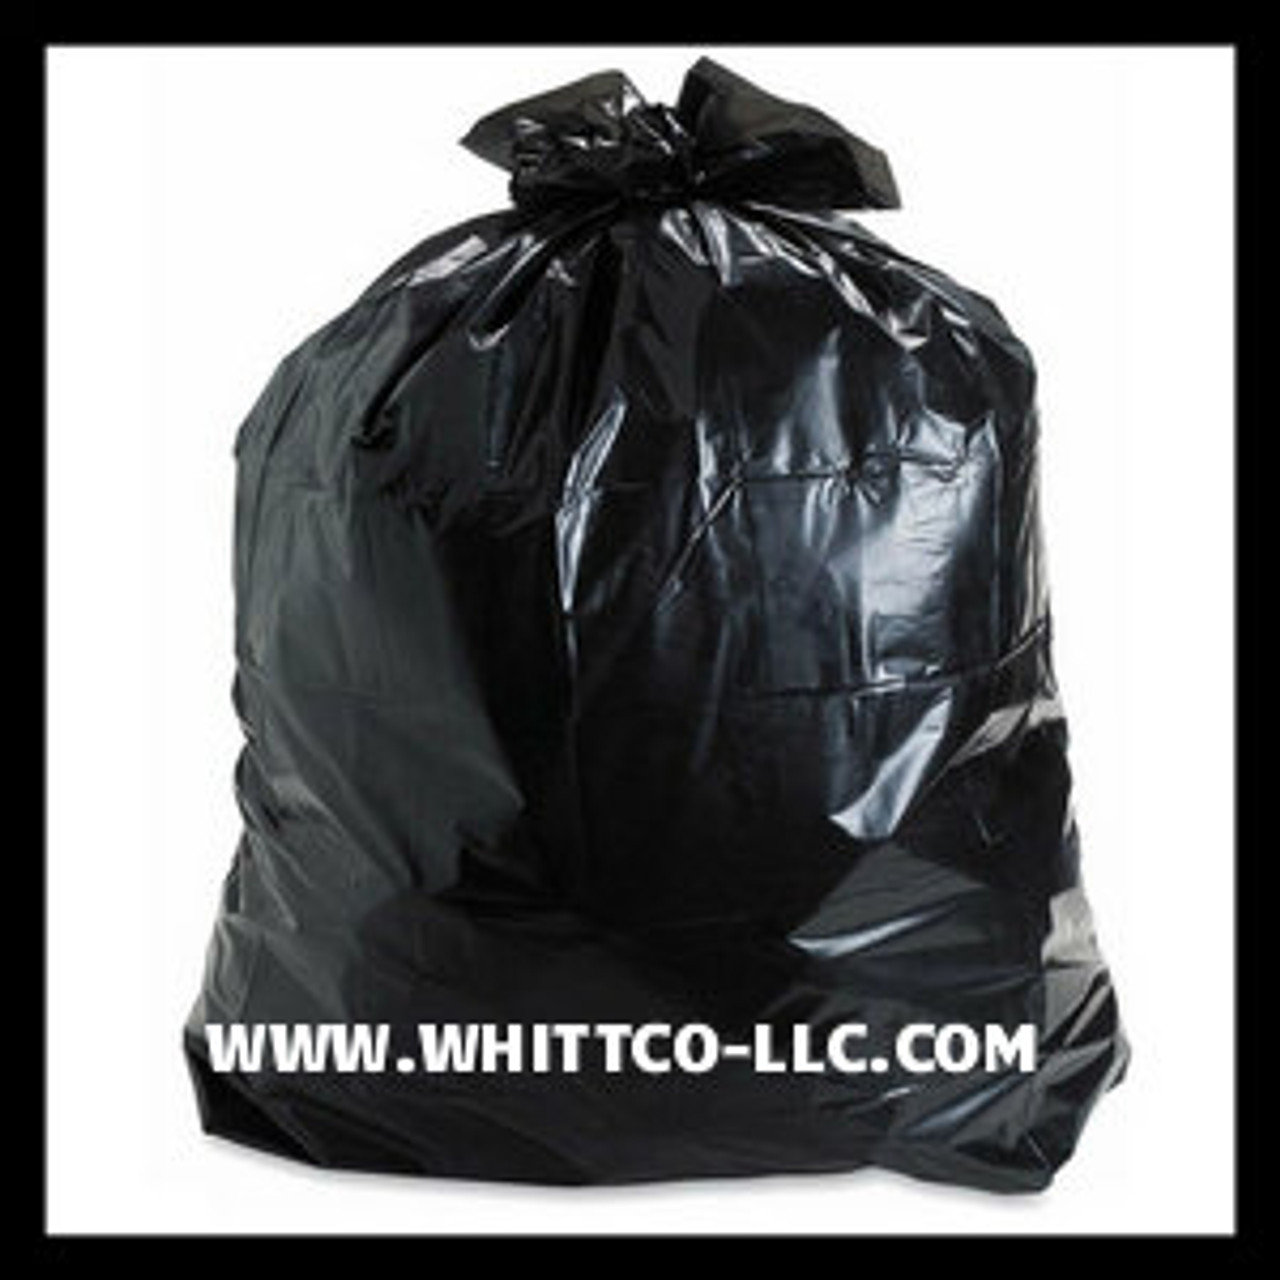 https://cdn11.bigcommerce.com/s-tfh34o/images/stencil/1280x1280/products/378/112914/Black_Trash_Bags_WHITTCO_Industrial_Supplies__38192.1410783686.jpg?c=2?imbypass=on